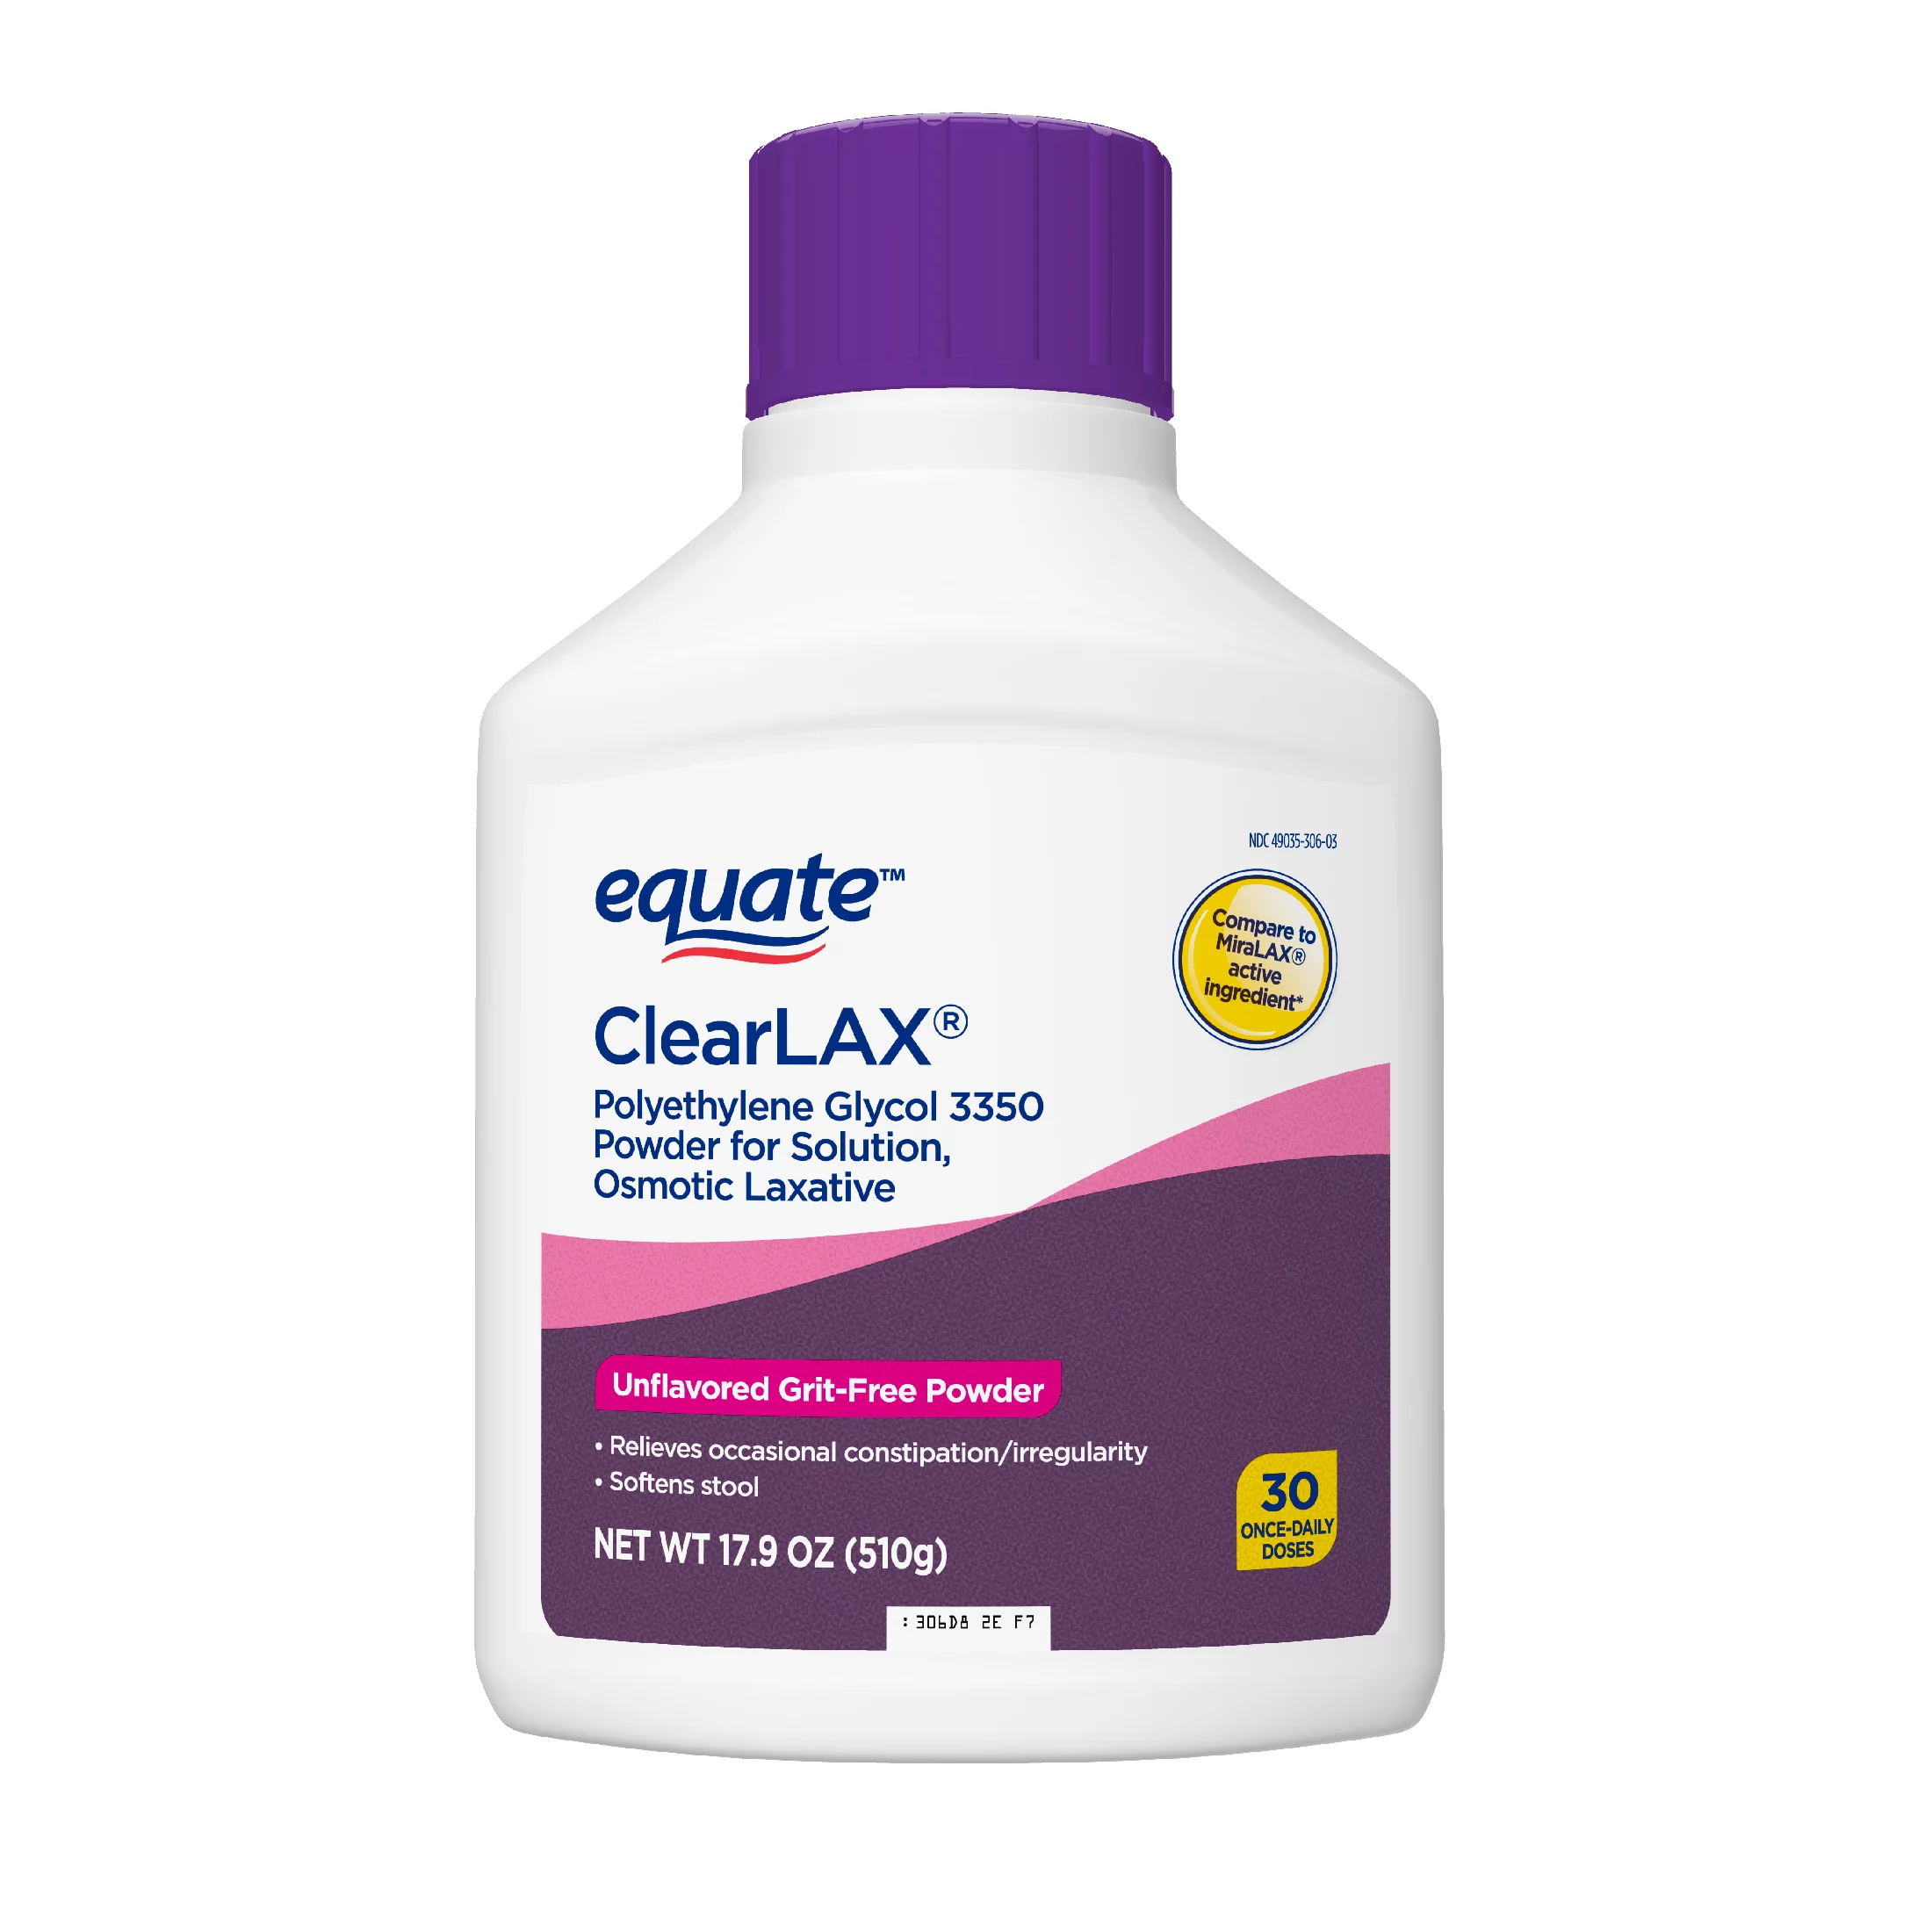 Equate ClearLax Polyethylene Glycol 3350 Powder for Solution, Unflavored, 30 Doses